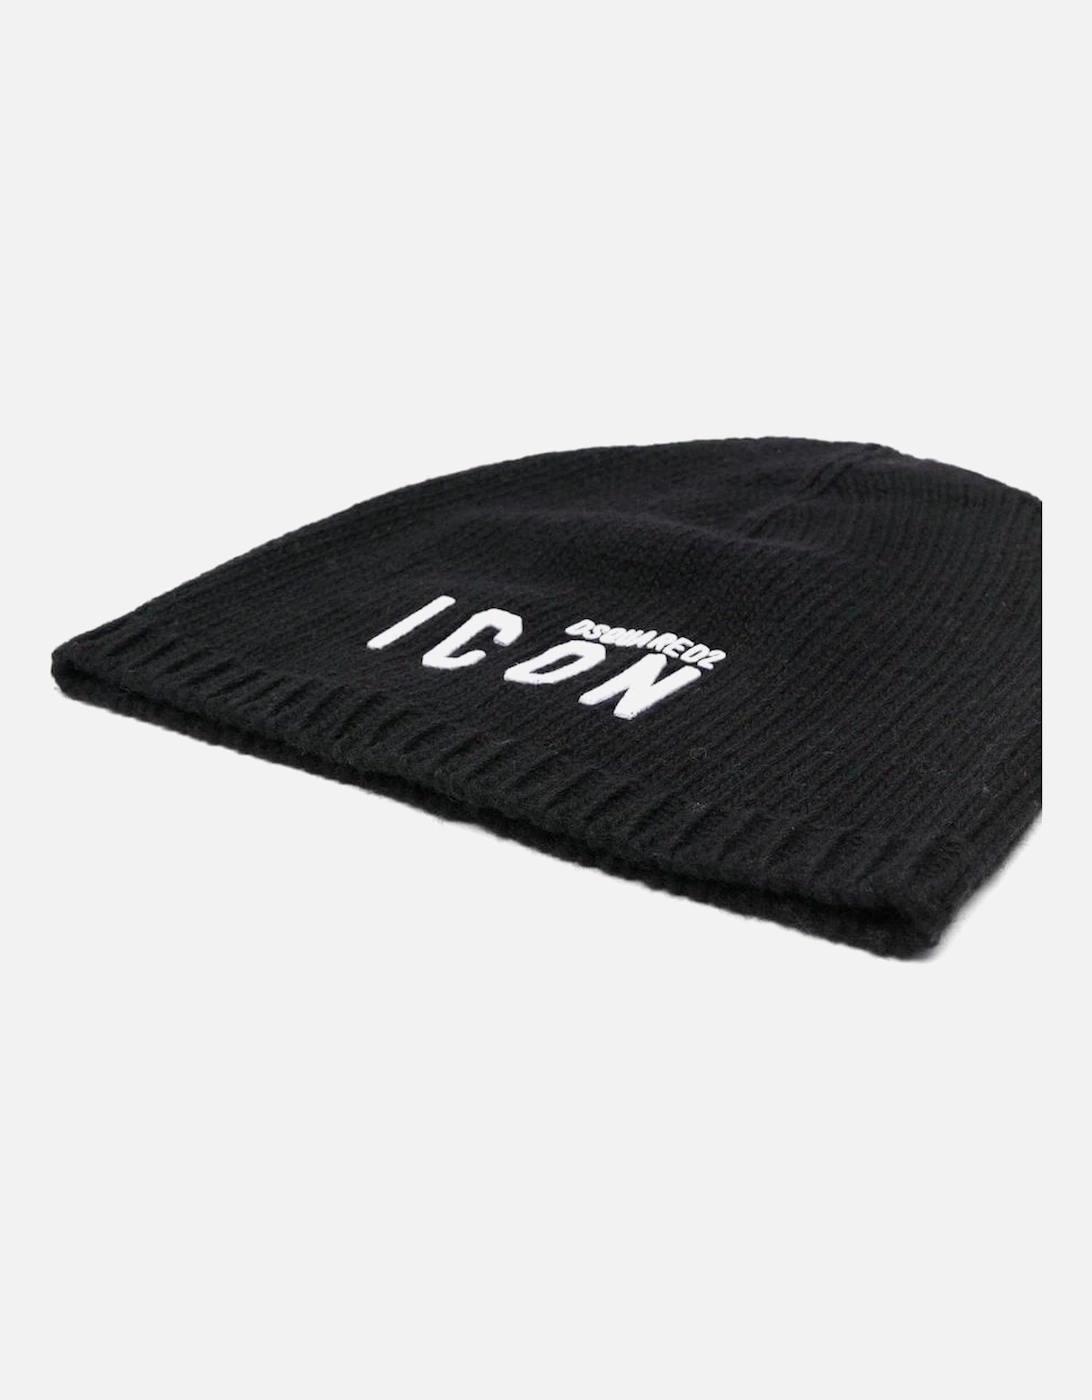 Be Icon Knitted Hat Black